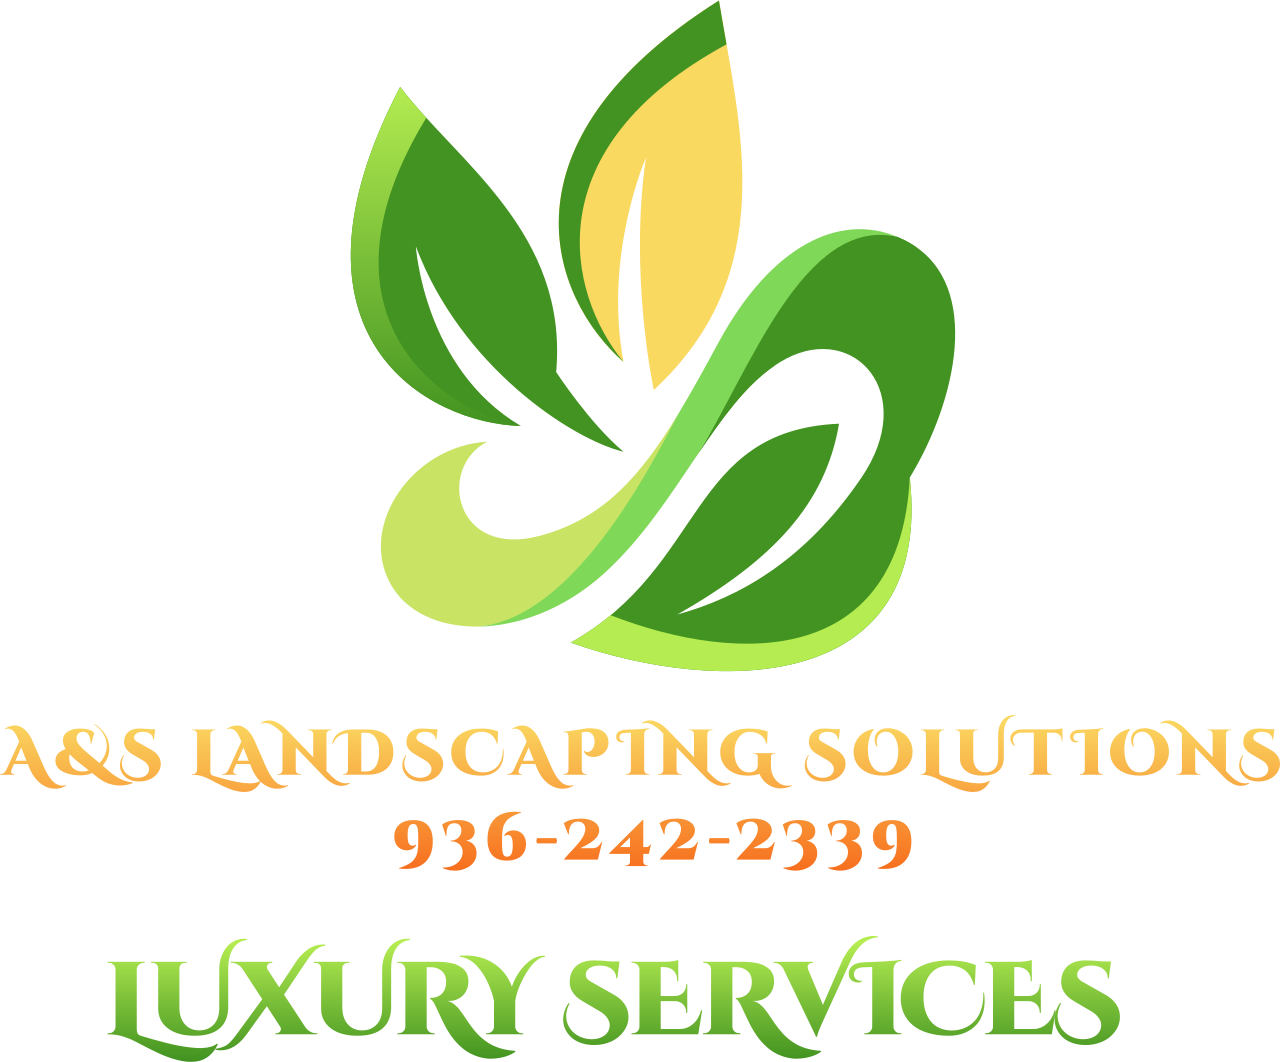 A&S LANDSCAPING SOLUTIONS 
936-242-2339's logo